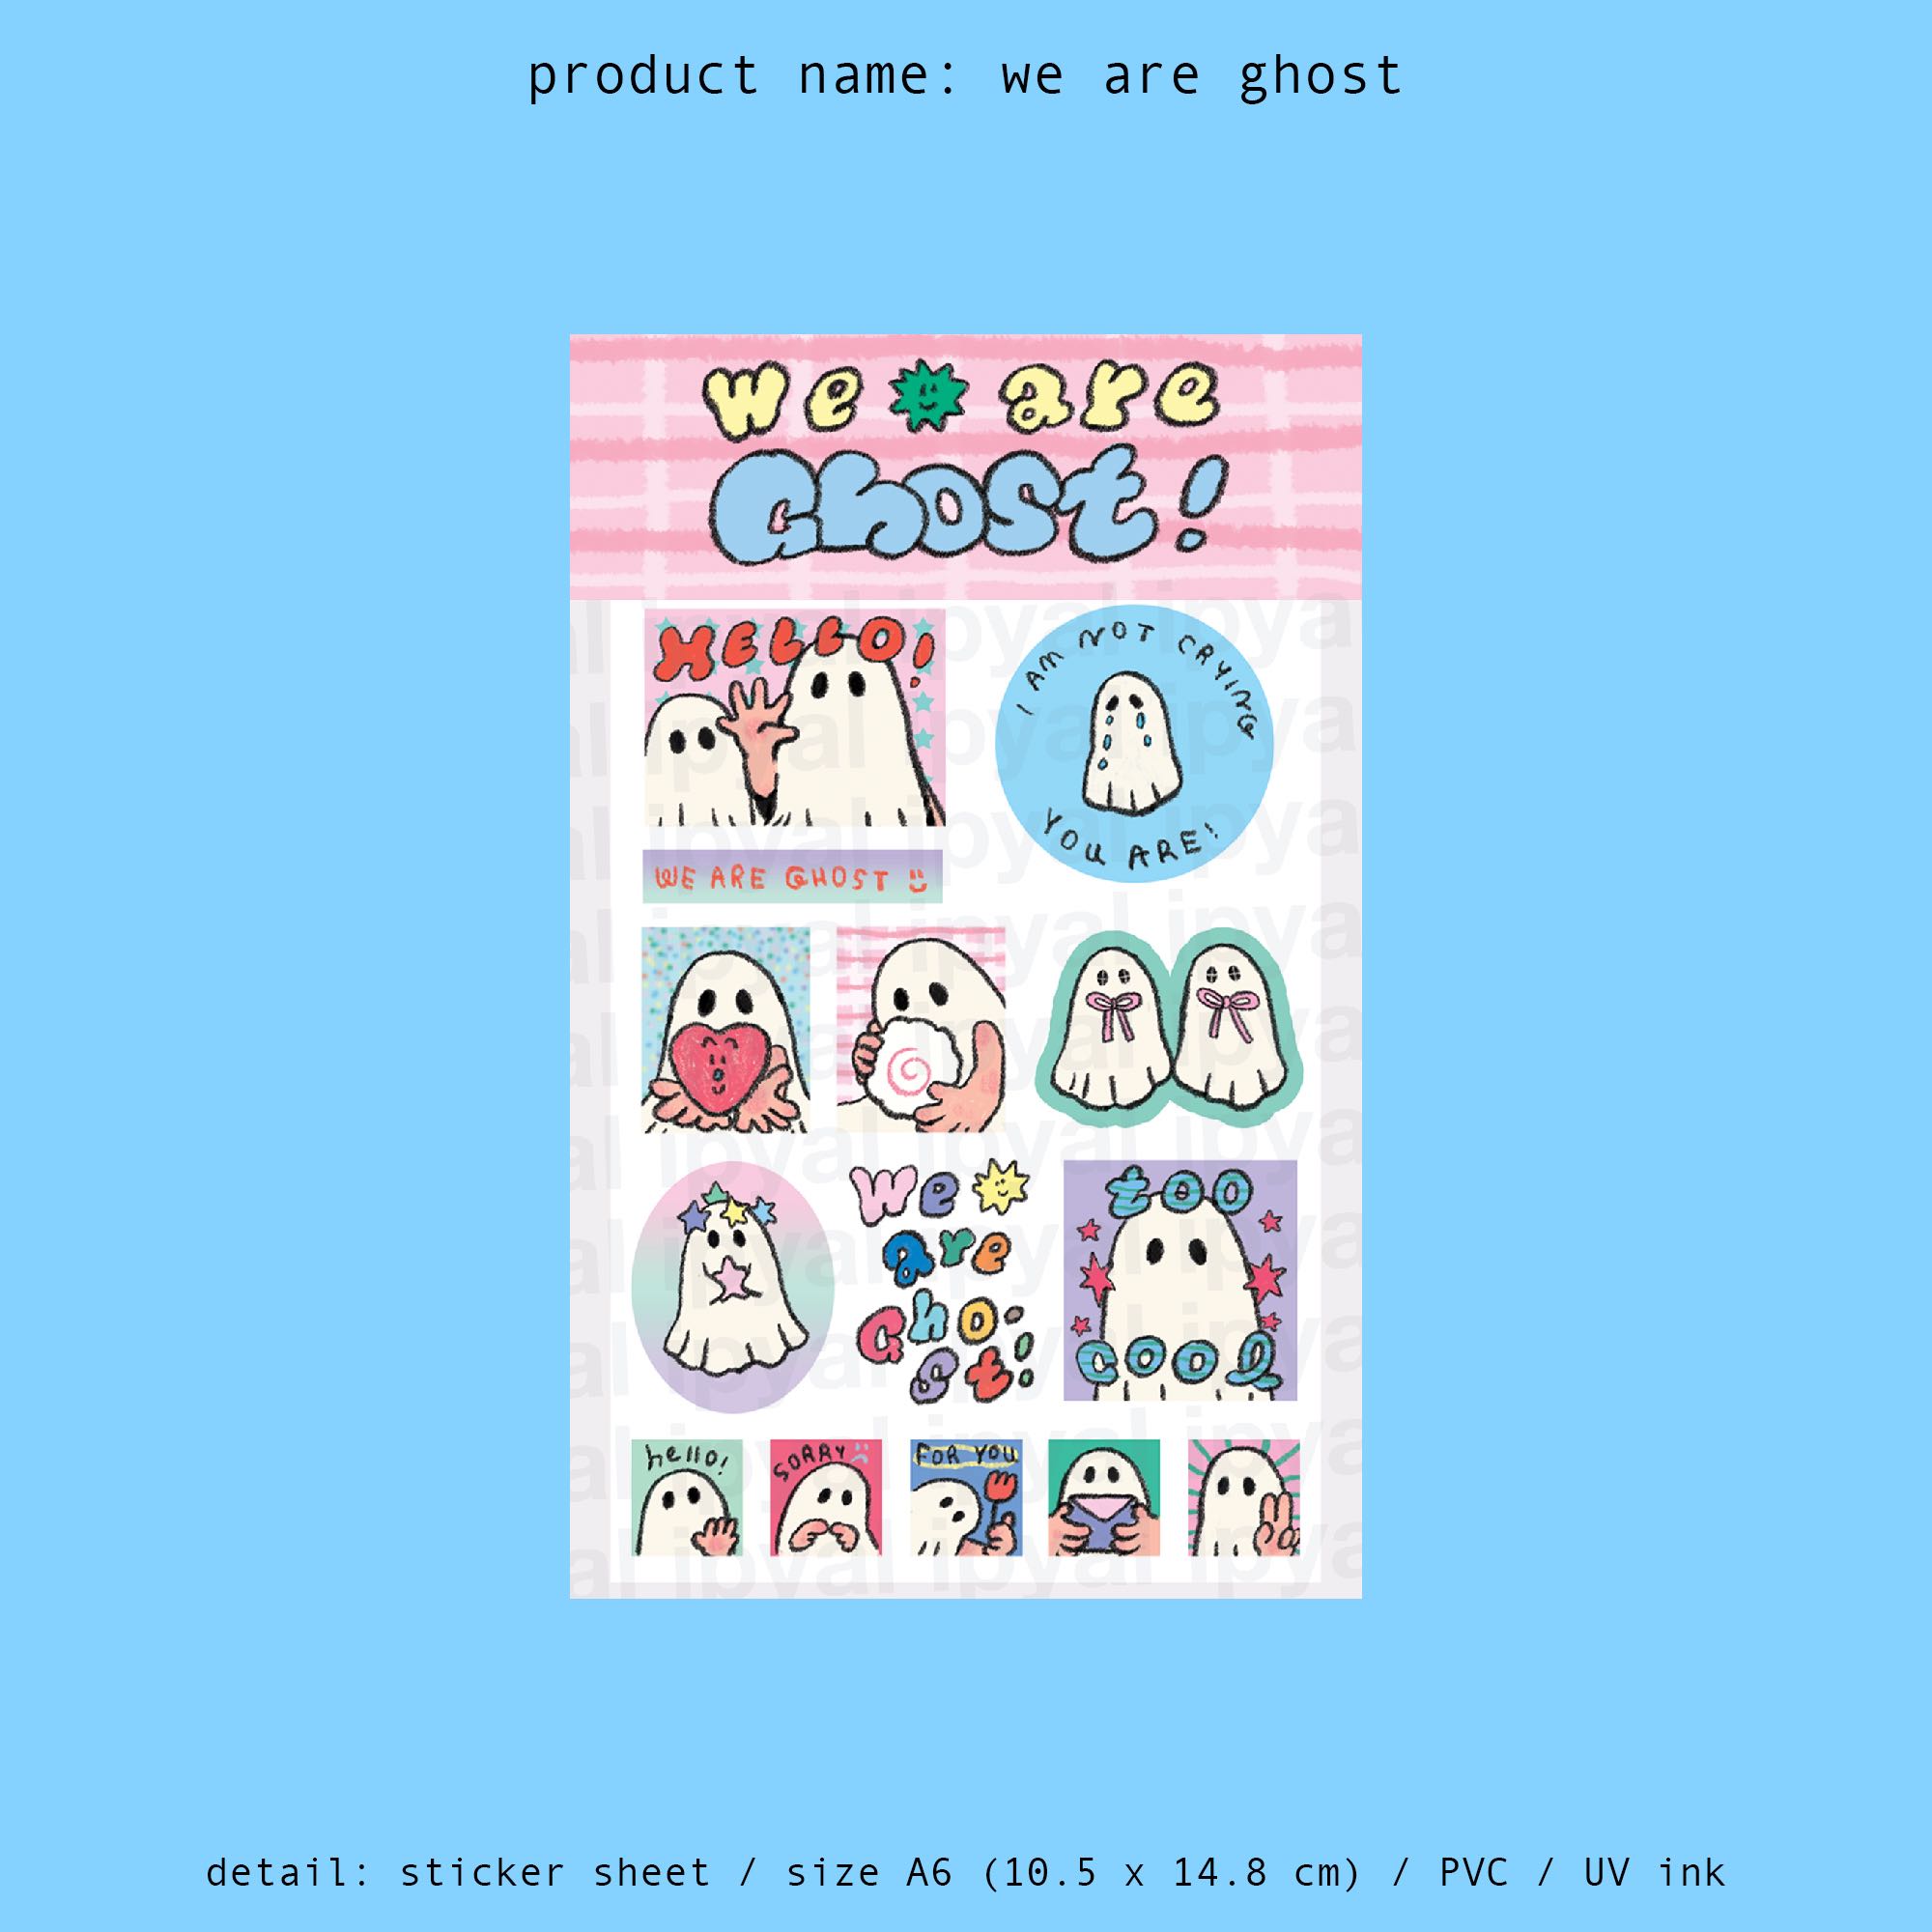 we are ghost / sticker sheet